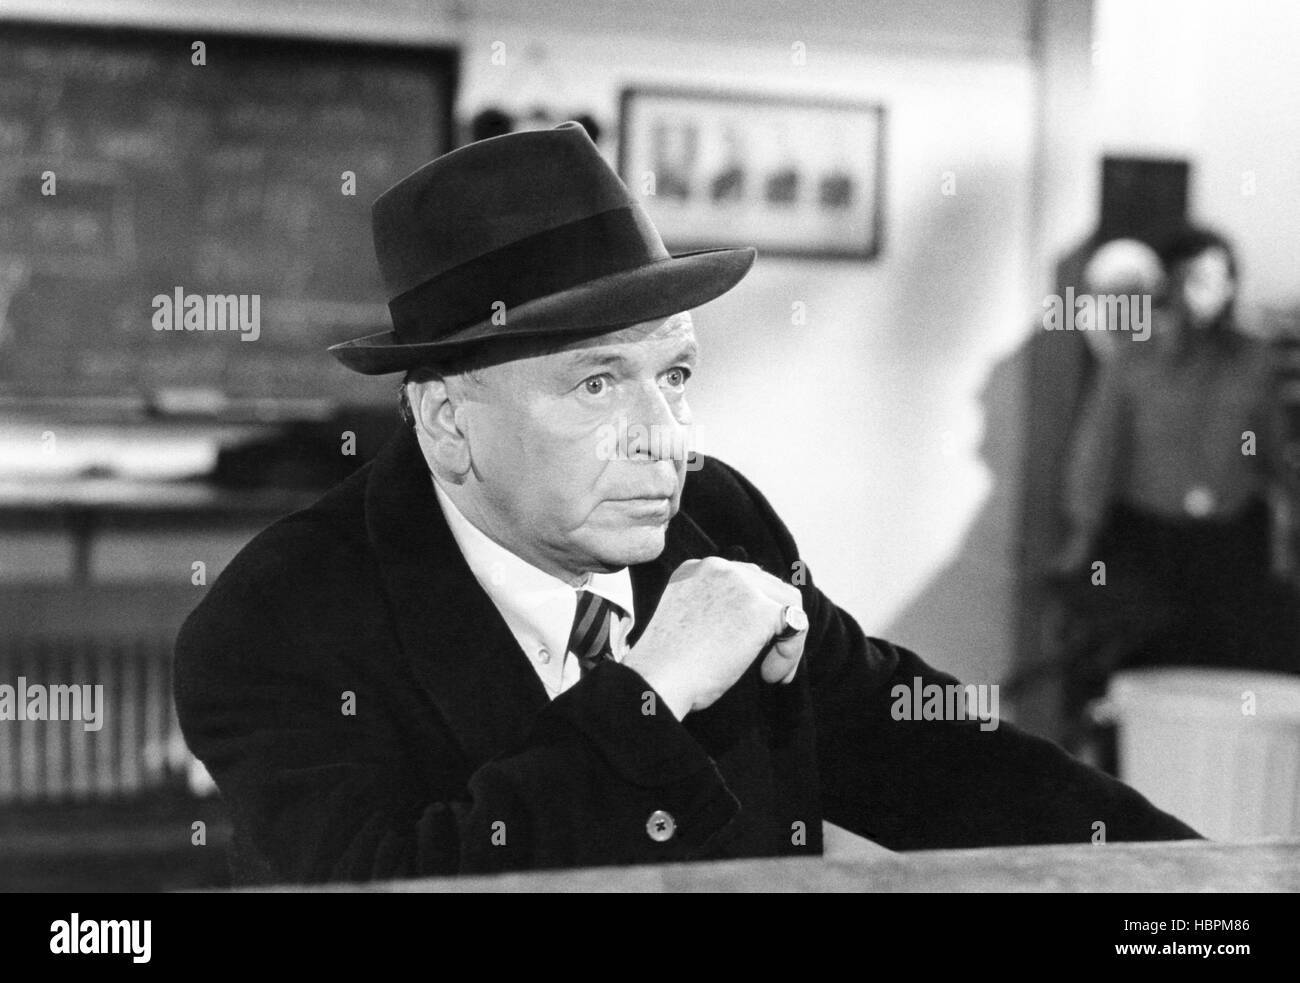 THE FIRST DEADLY SIN, Frank Sinatra, 1980. ©Warner Brothers/courtesy ...